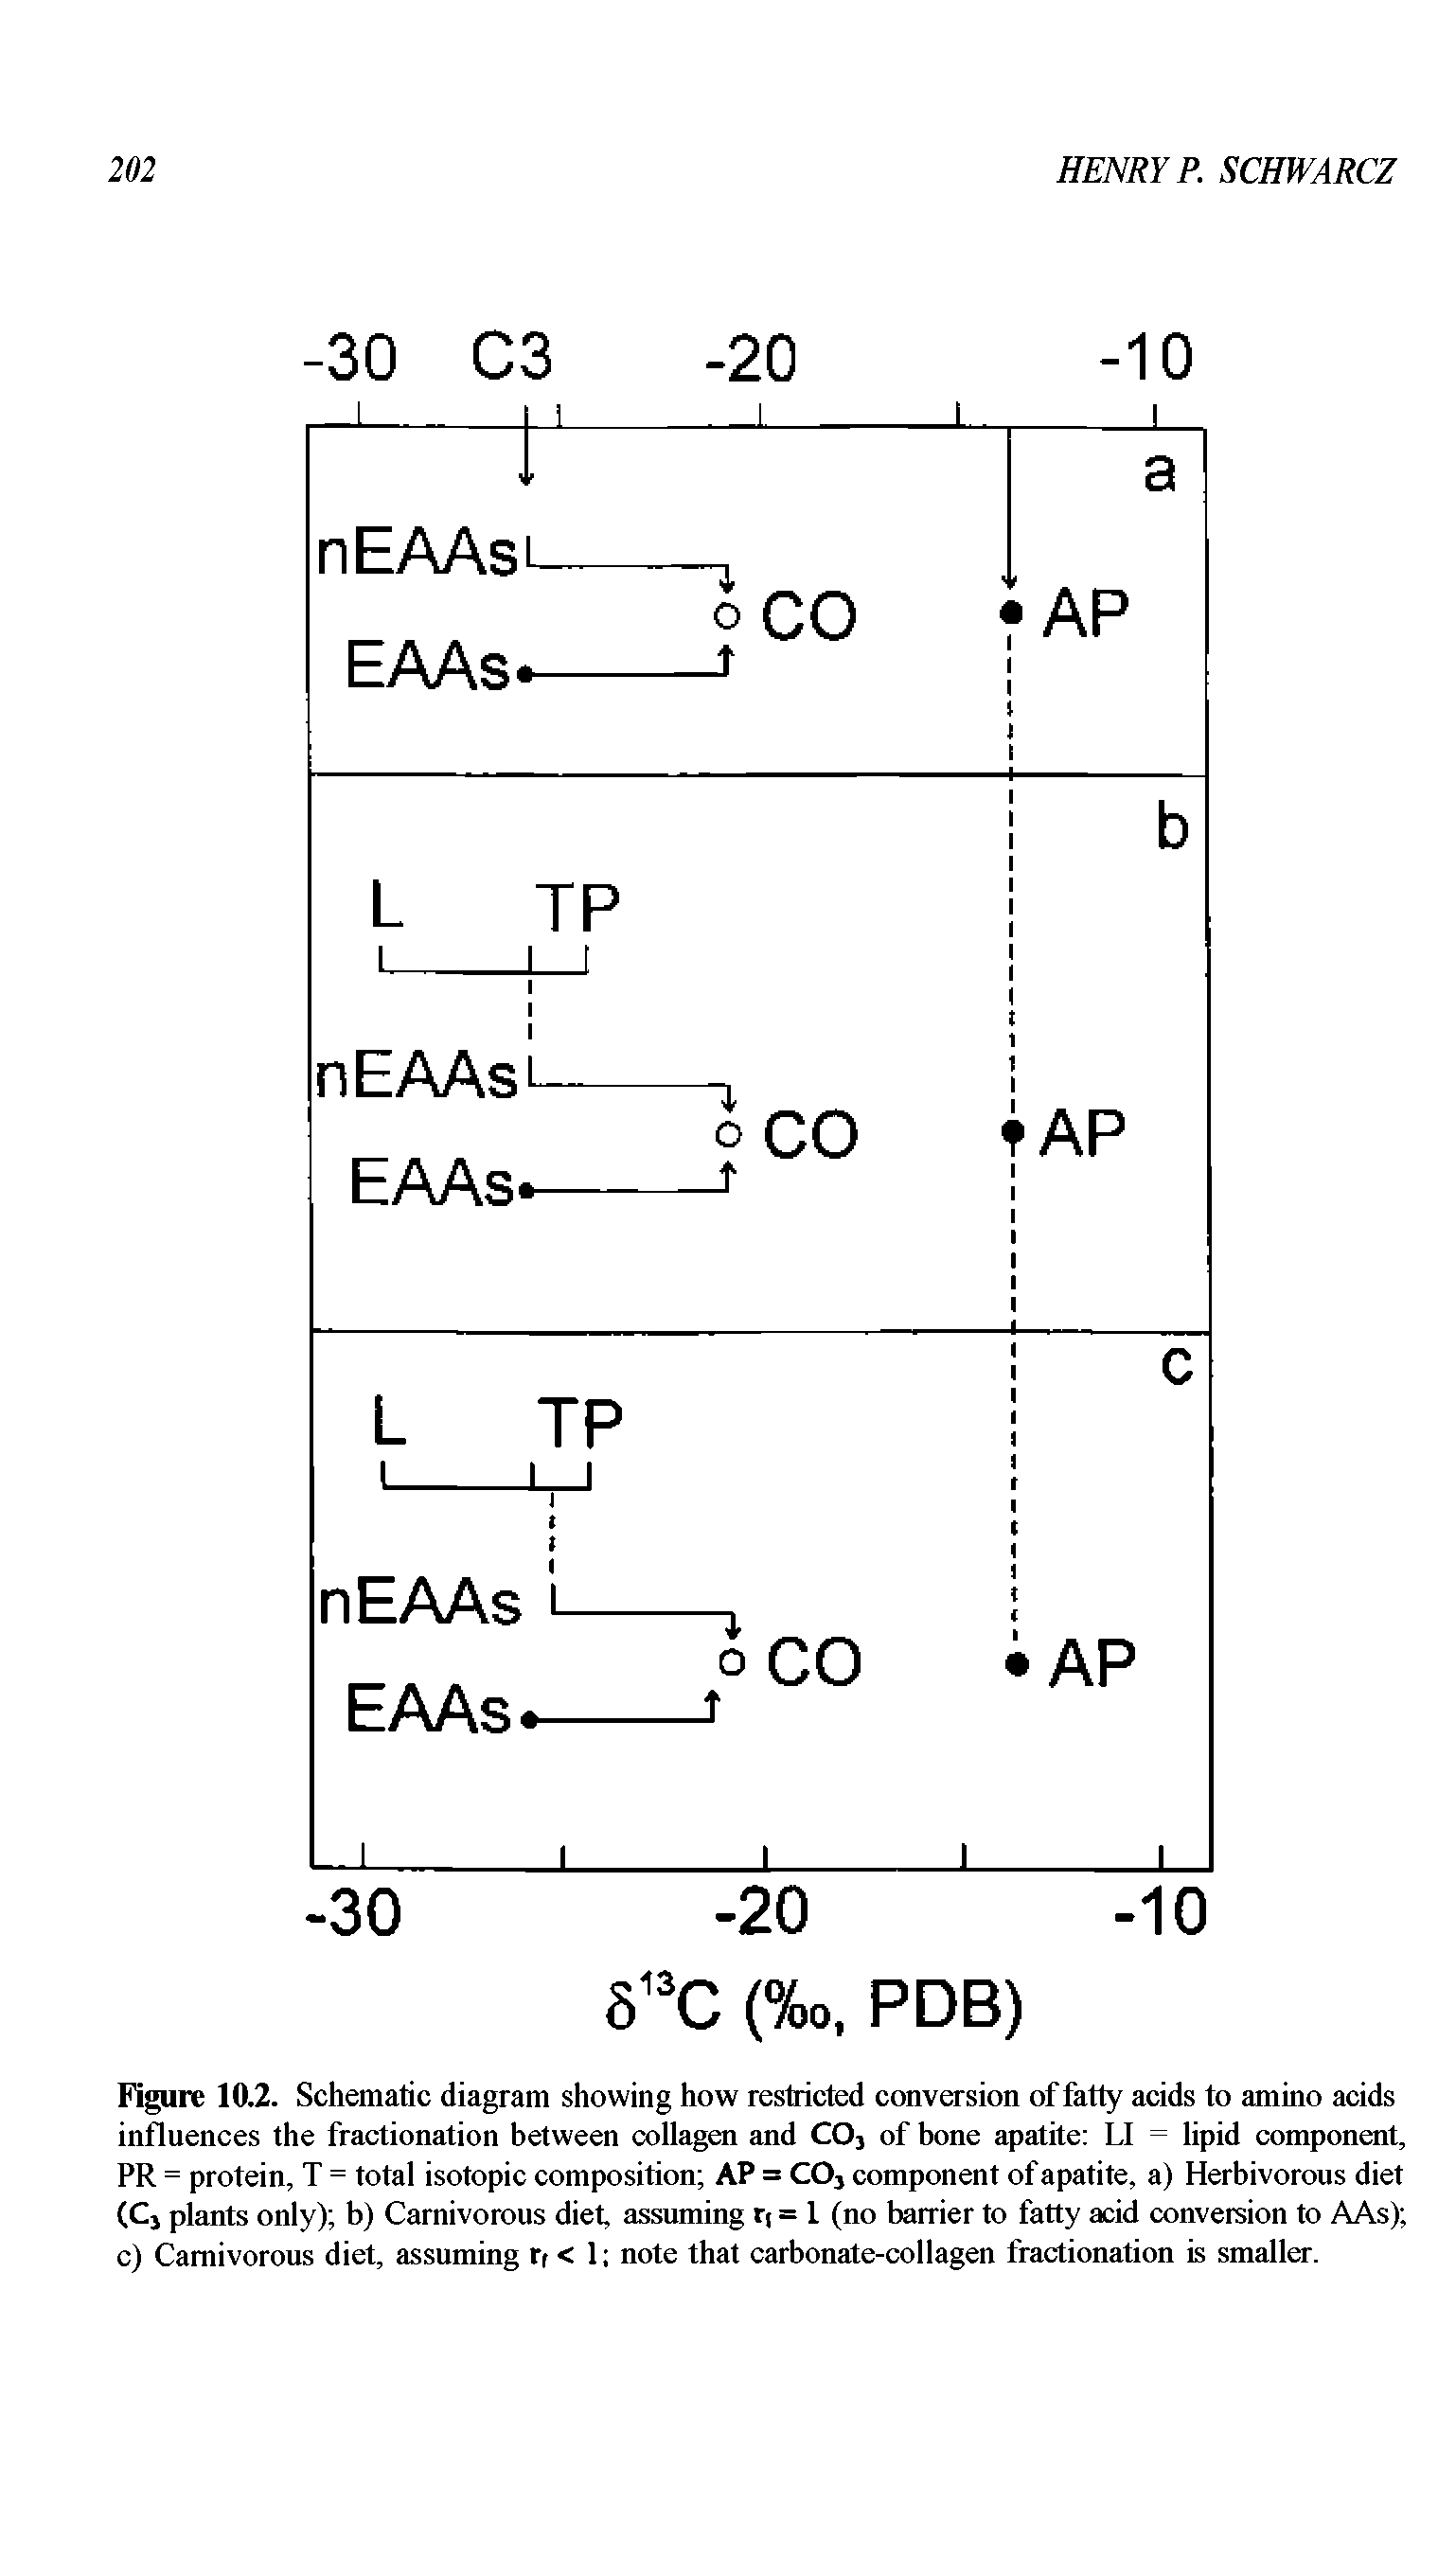 Figure 10.2. Schematic diagram showing how restricted conversion of fatty acids to amino acids influences the fractionation between collagen and CO3 of bone apatite LI = lipid component, PR = protein, T = total isotopic composition AP = COj component of apatite, a) Herbivorous diet (Cj plants only) b) Carnivorous diet, assuming rj = 1 (no barrier to fatty acid conversion to AAs) c) Carnivorous diet, assuming ri < 1 note that carbonate-collagen fractionation is smaller.